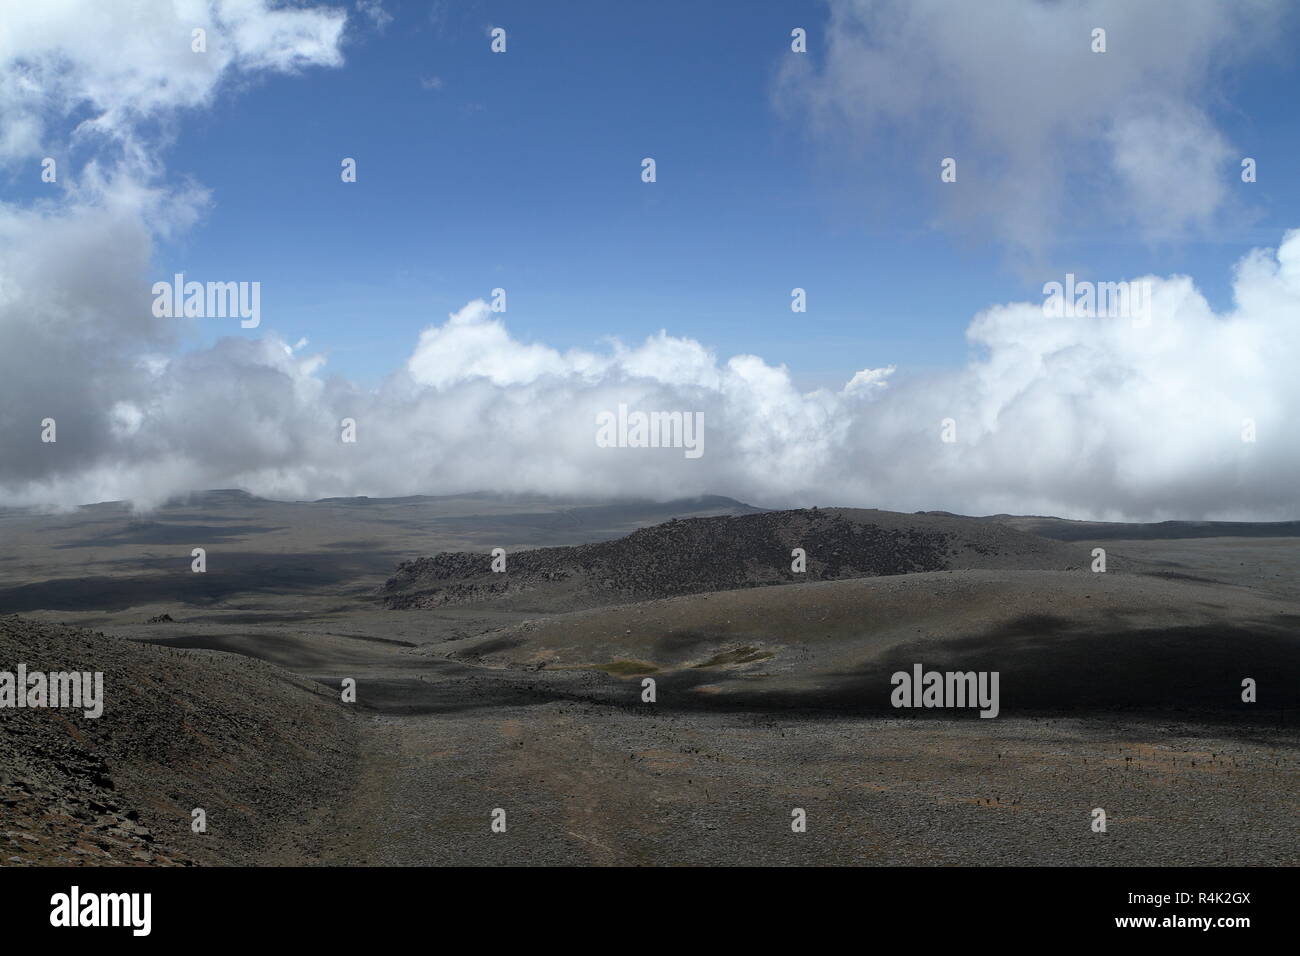 on the high plateau of the bale mountains in ethiopia Stock Photo